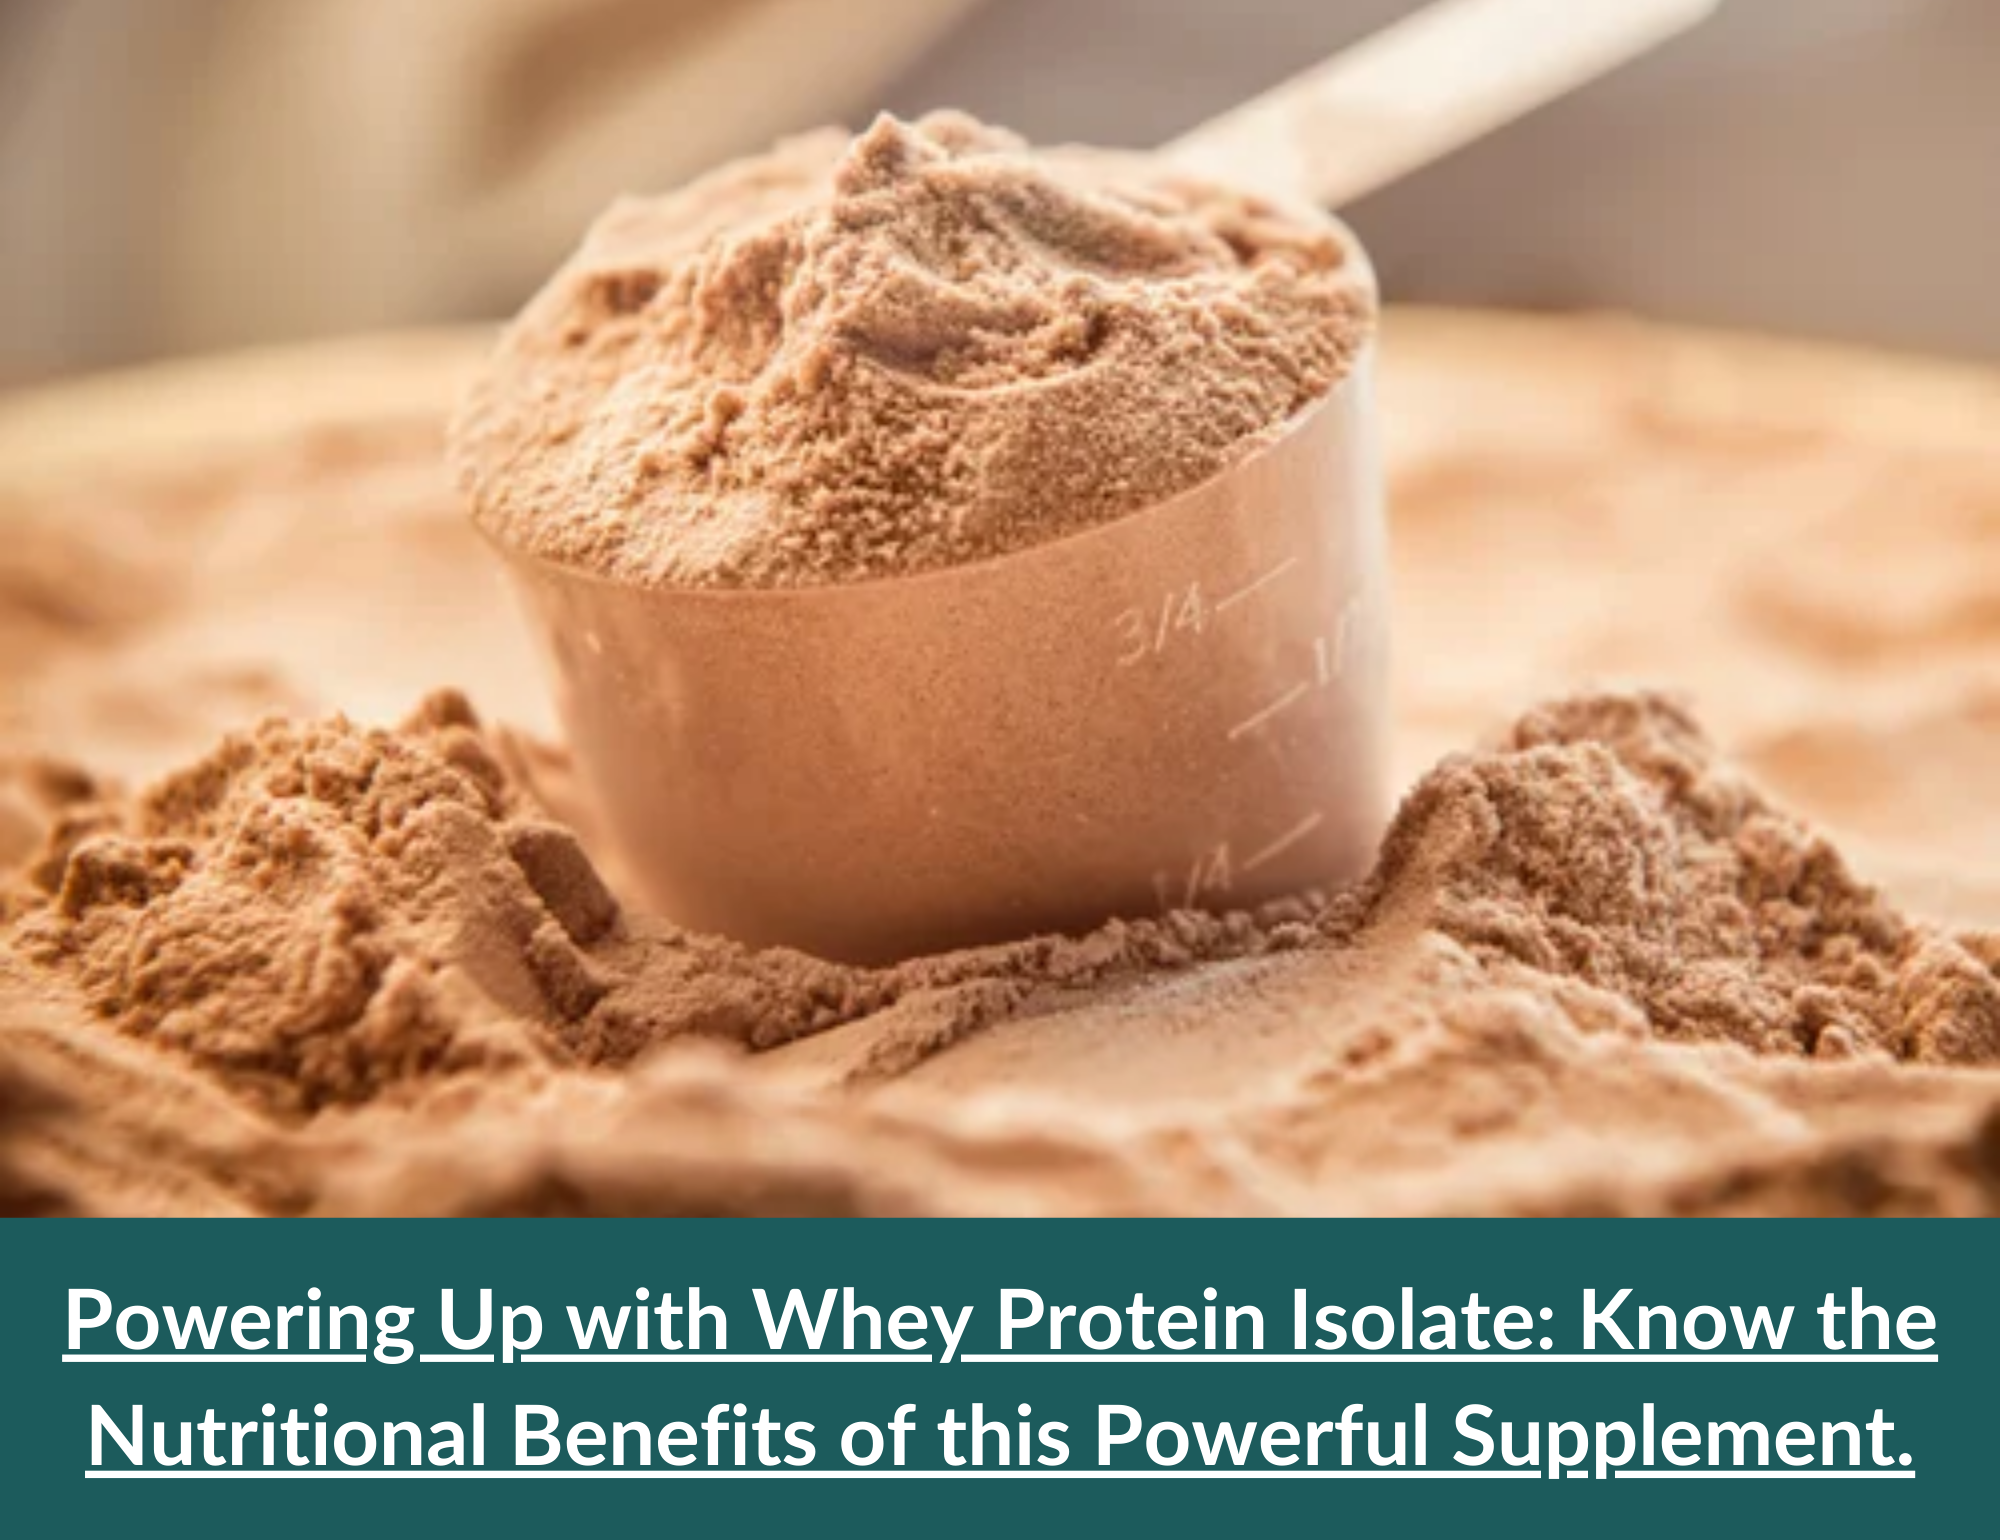 Powering Up with Whey Protein Isolate: Know the Nutritional Benefits of this Powerful Supplement.